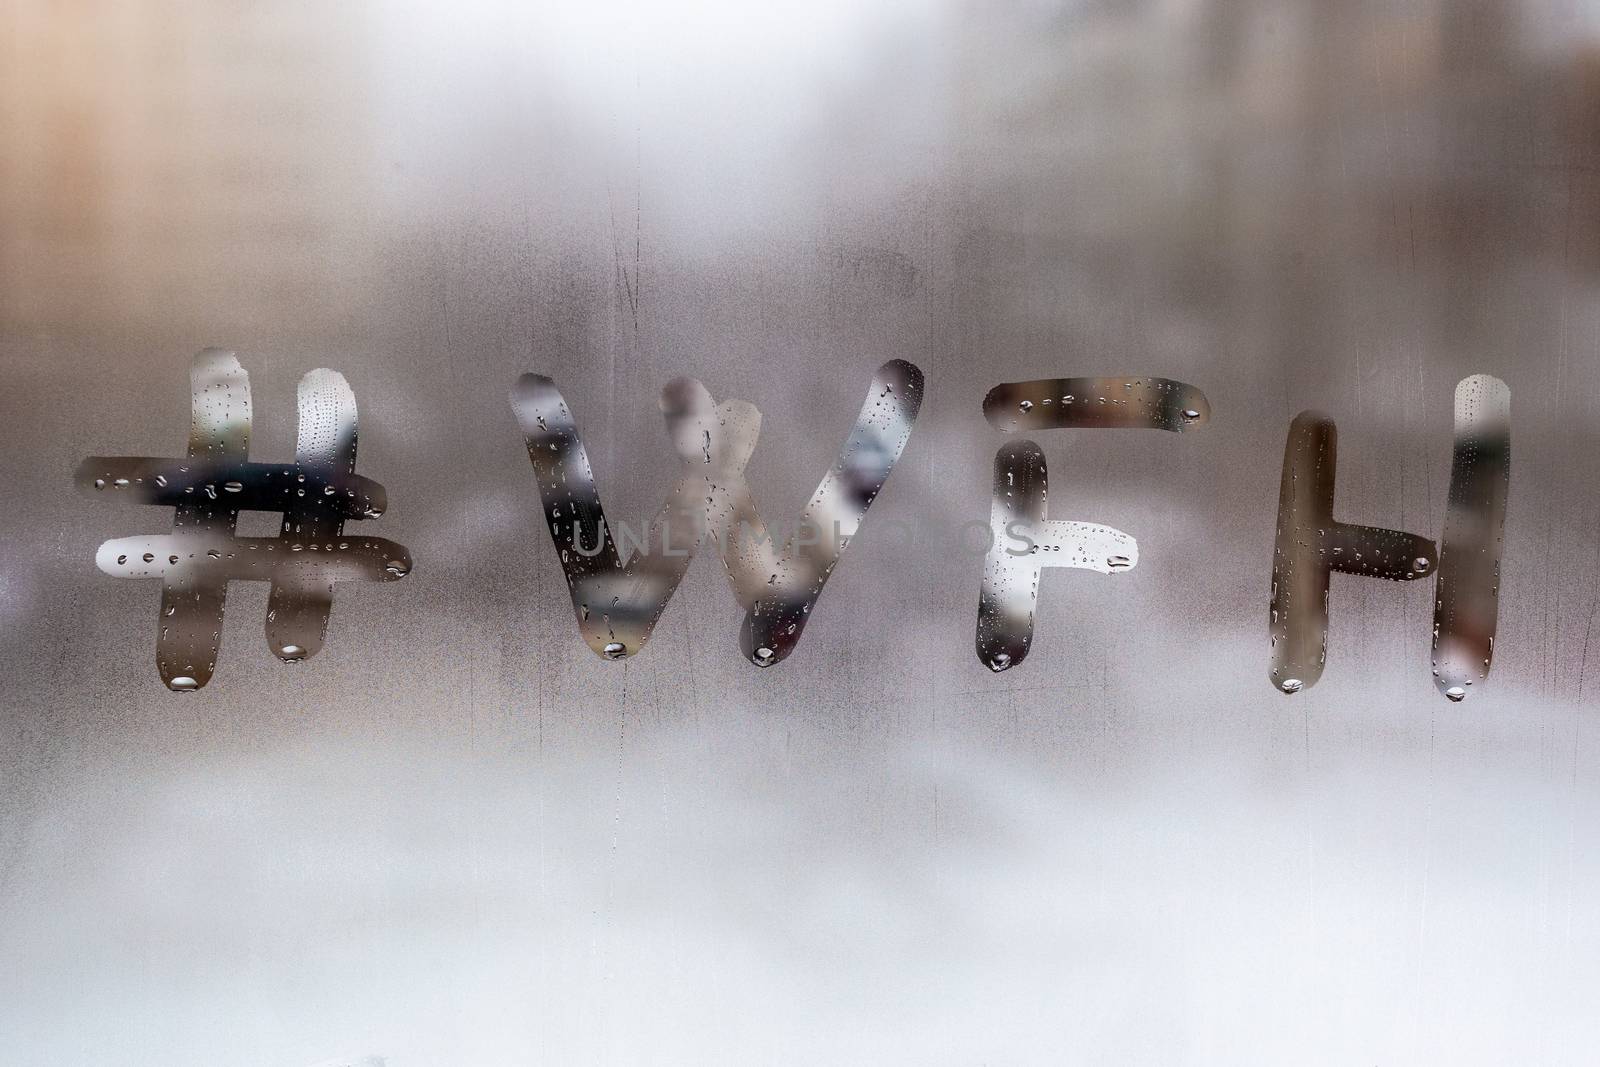 hashtag word wfh - work from home handritten on wet window glass at cloudy weather by z1b